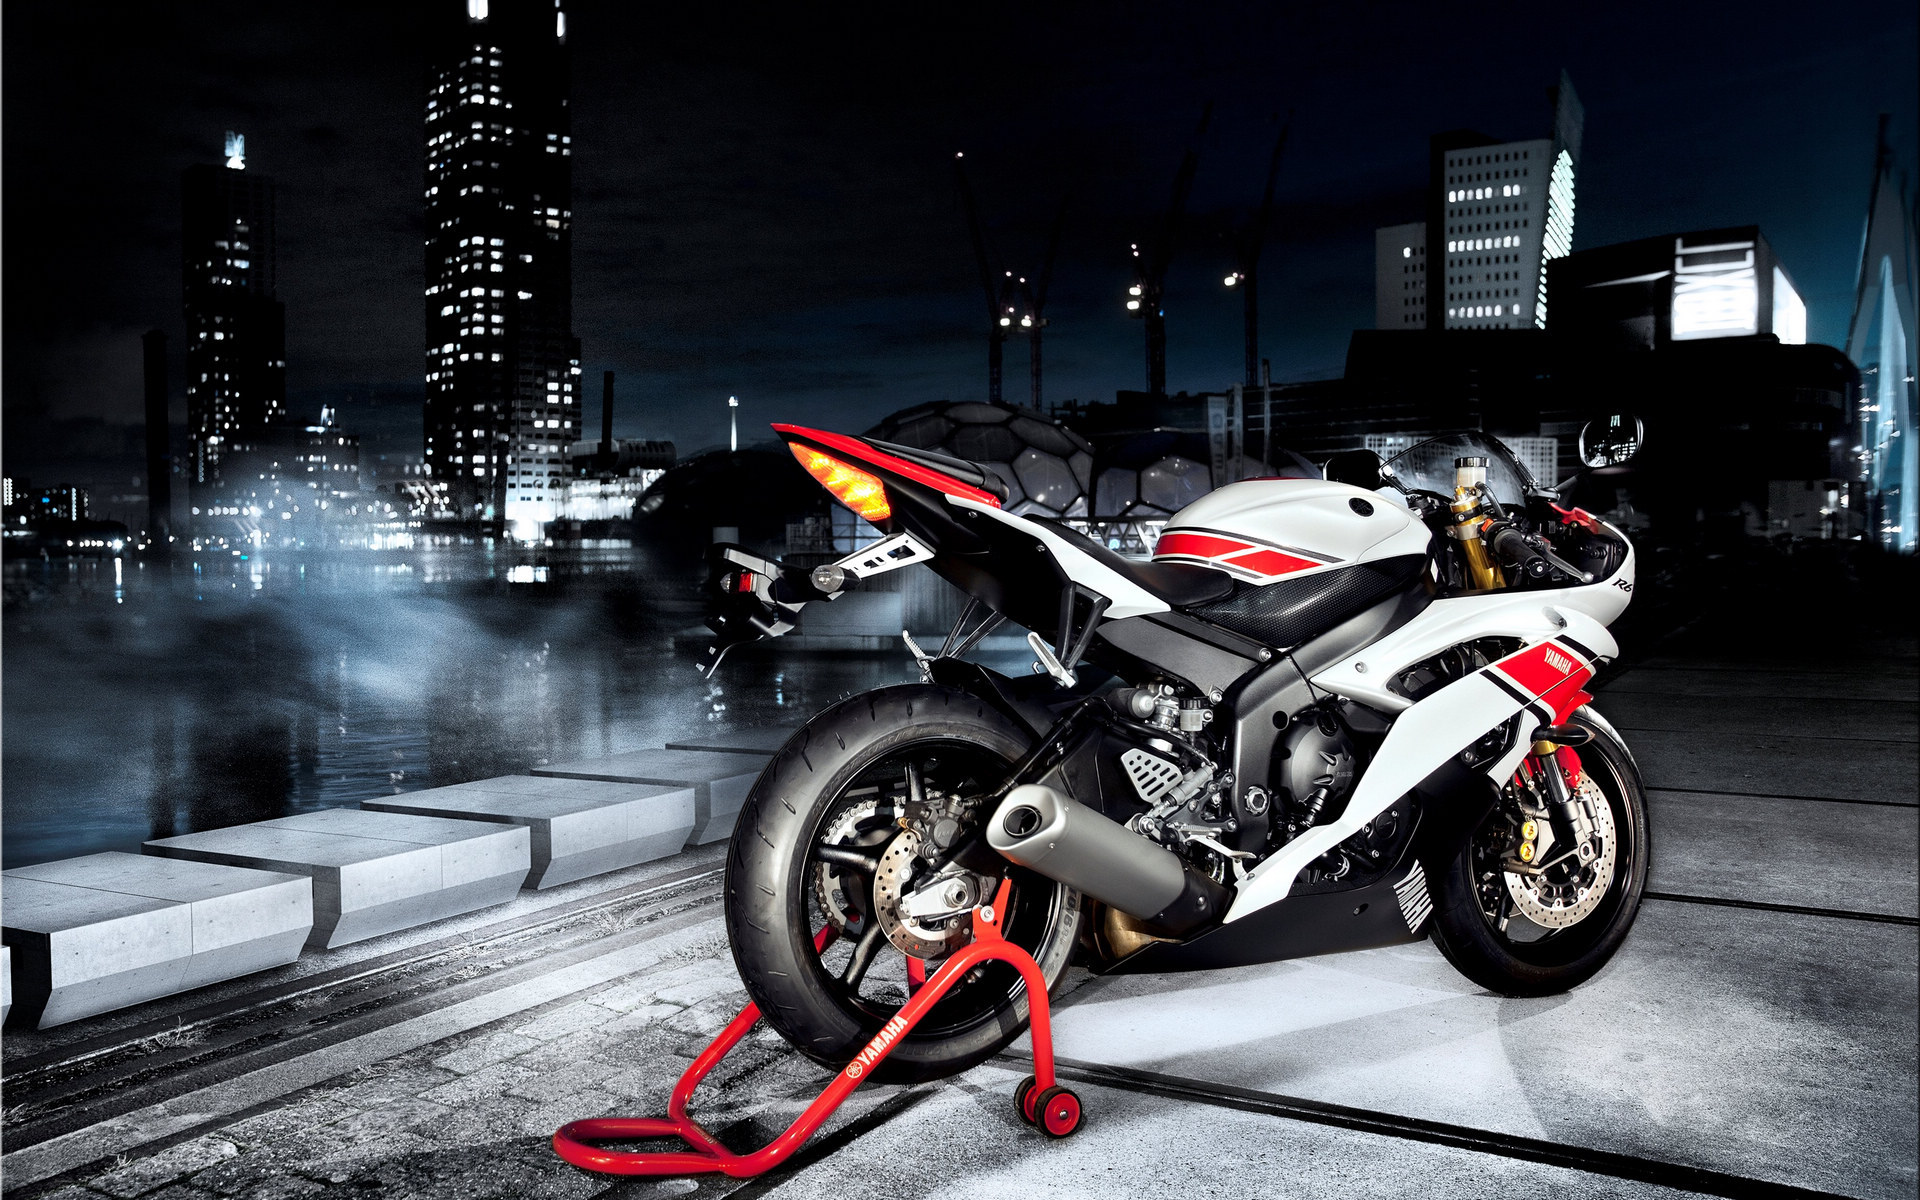 Ments To HD Yamaha Wallpaper Background Image For